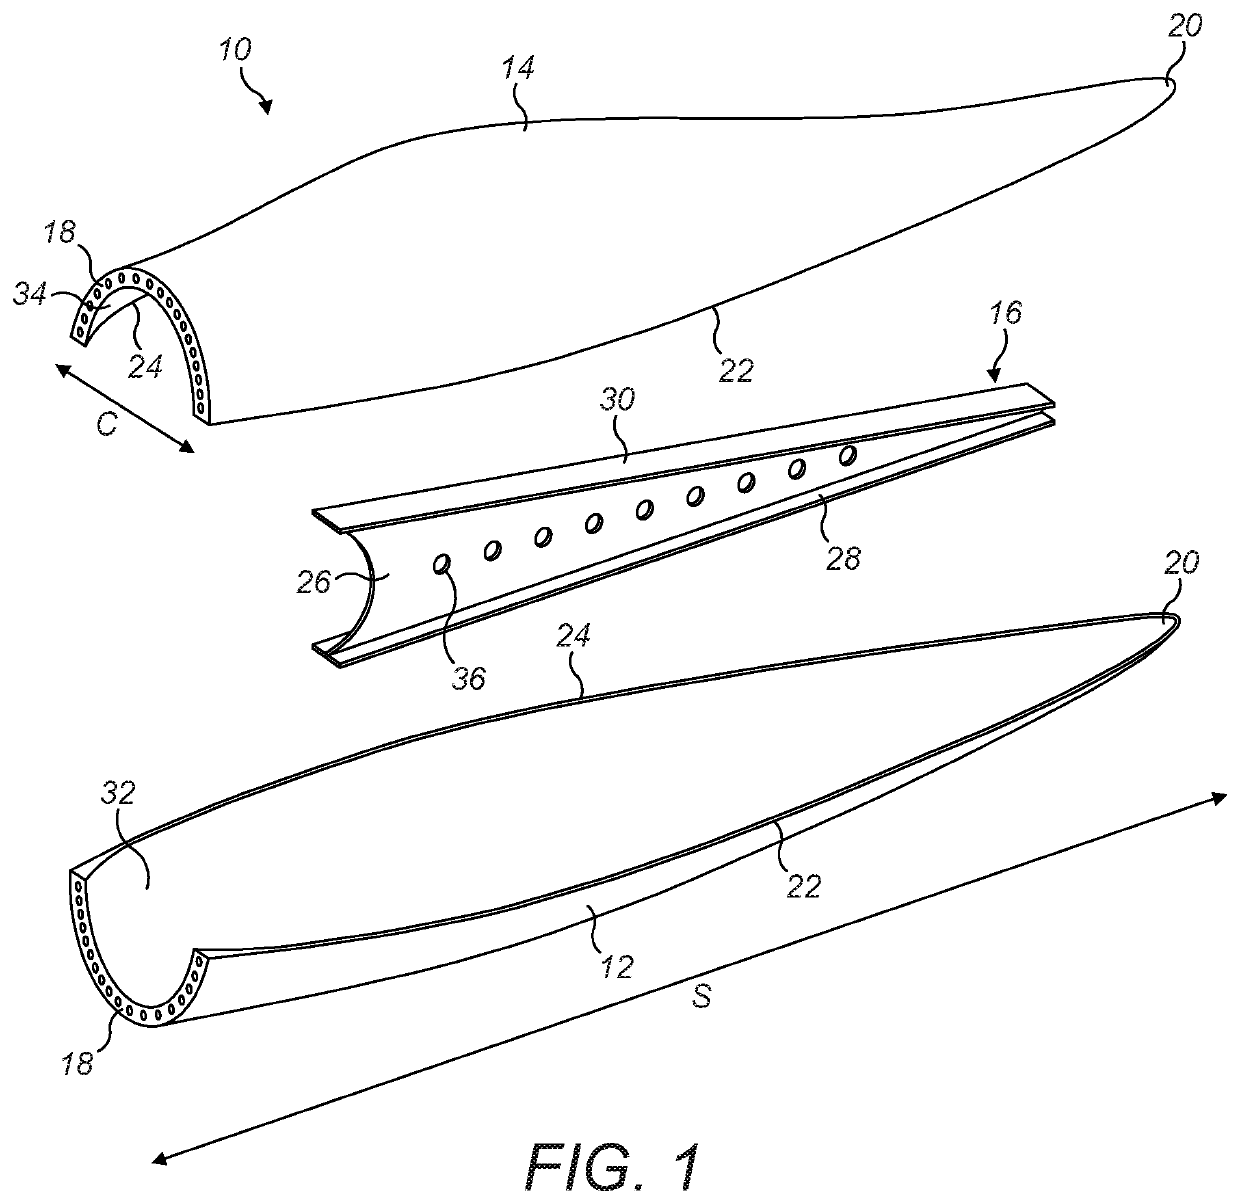 Improvements relating to wind turbine blade manufacture